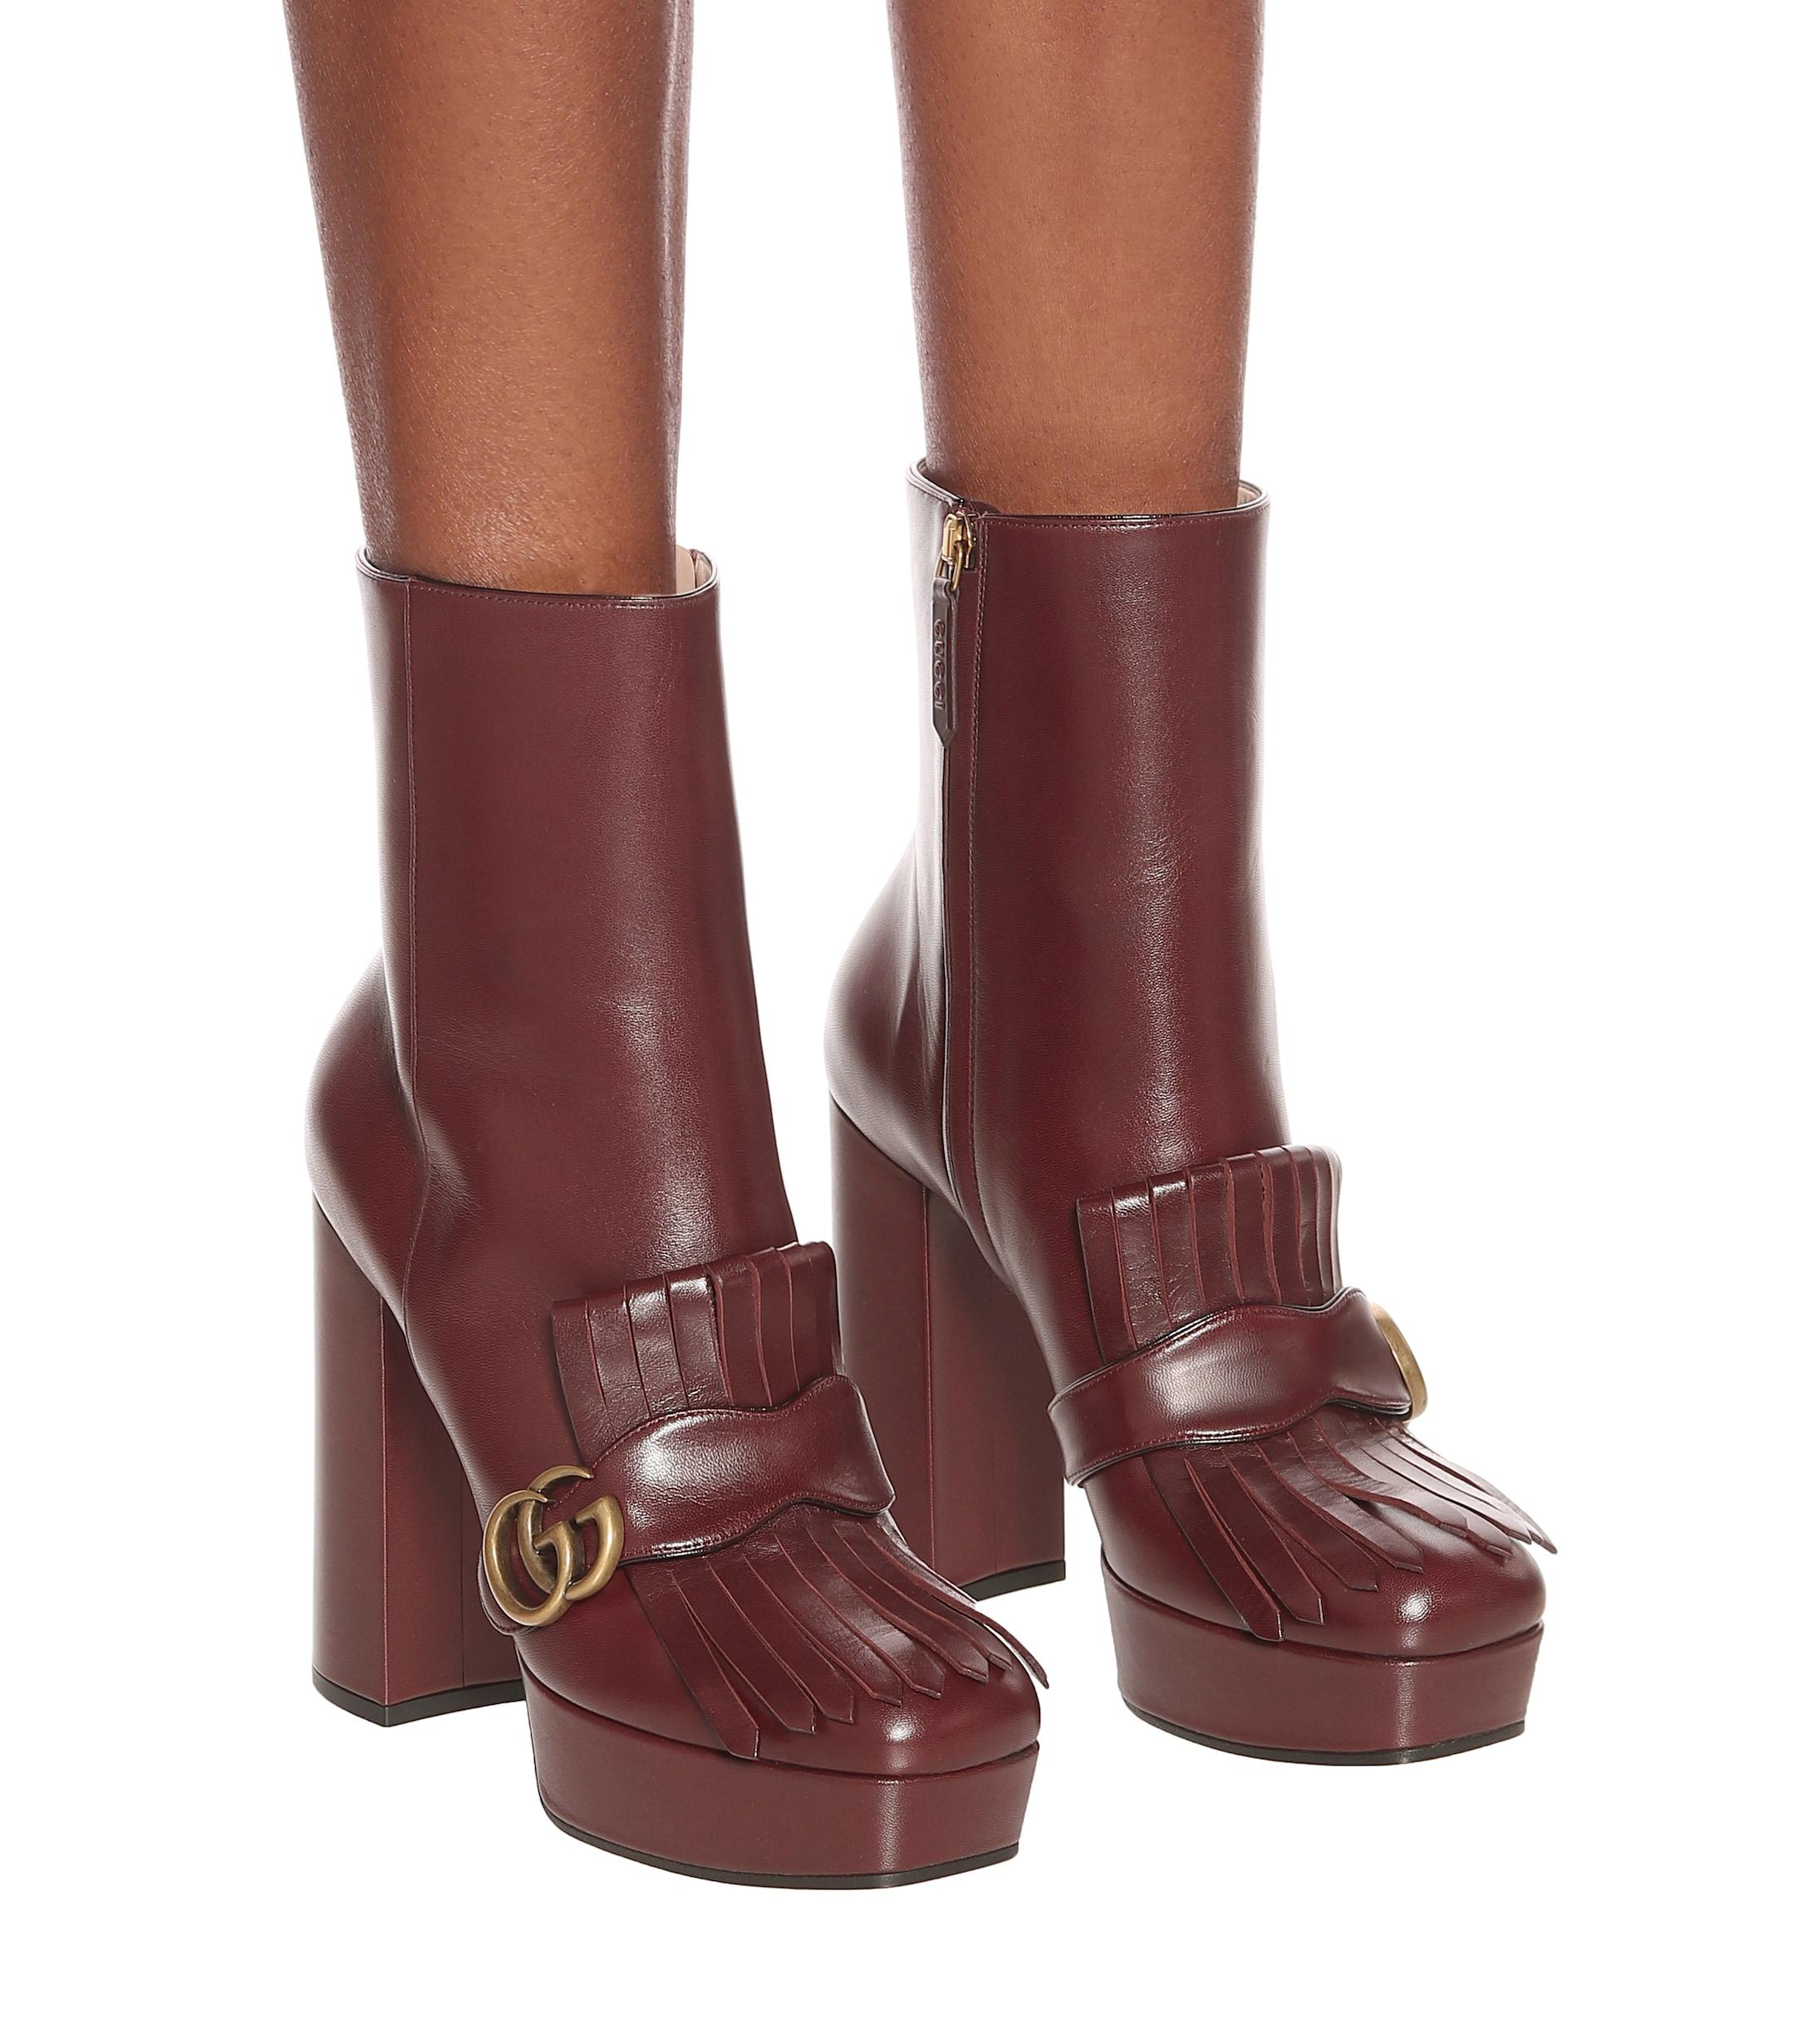 Gucci Marmont Leather Ankle Boots in Red - Lyst